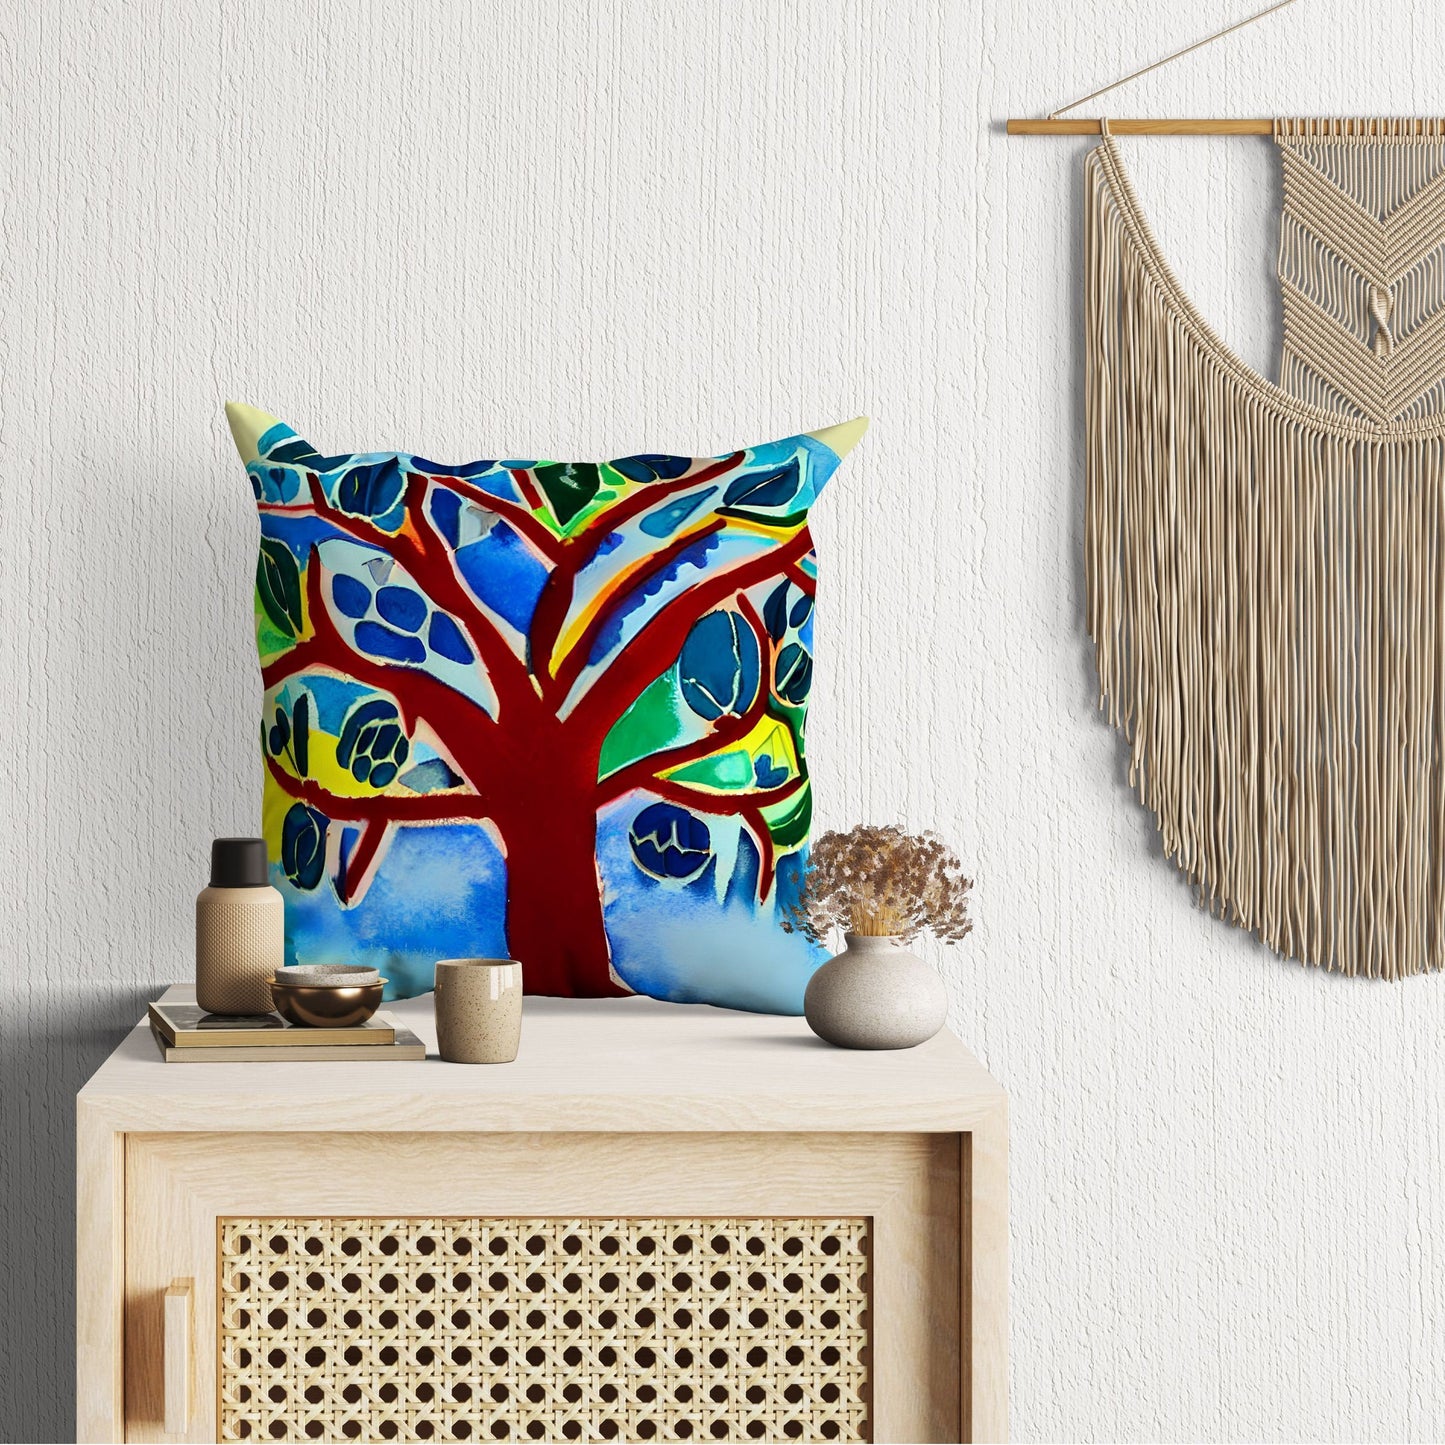 Tree Of Life Throw Pillow Cover, Abstract Throw Pillow Cover, Artist Pillow, Colorful Pillow Case, Contemporary Pillow, Square Pillow